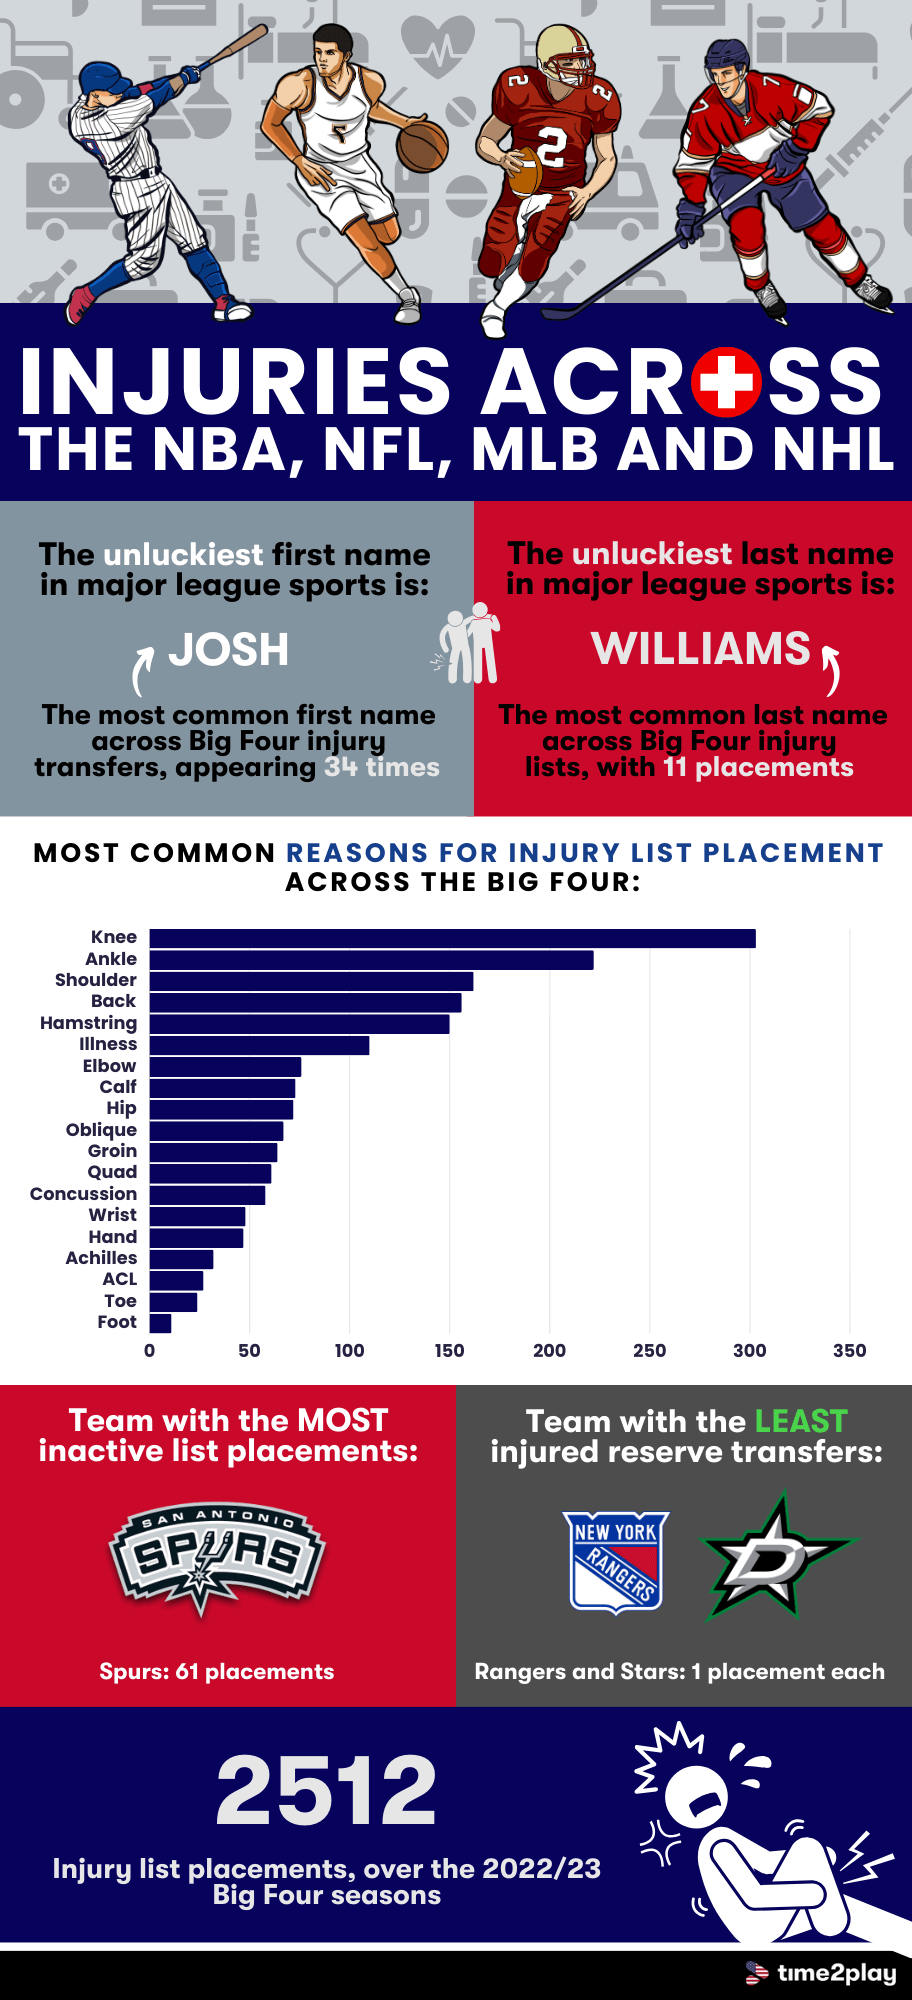 The following image is an infographic presenting injury data related to the Big Four major league sports in the US